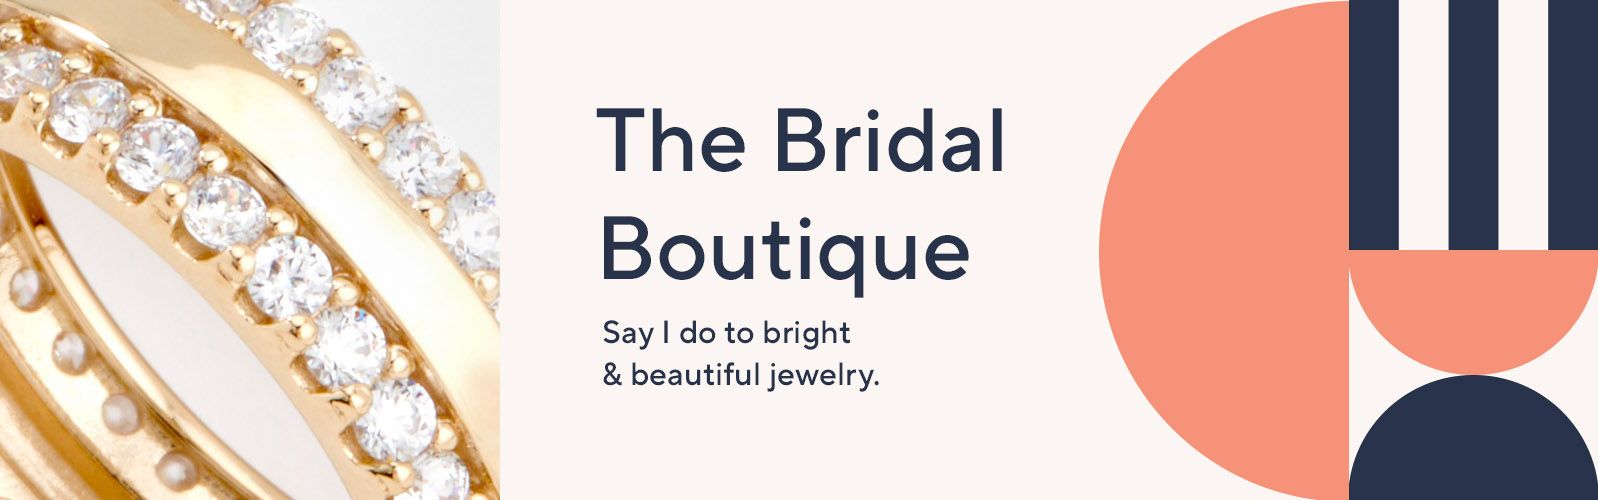 The Bridal Boutique. Say I do to bright & beautiful jewelry.